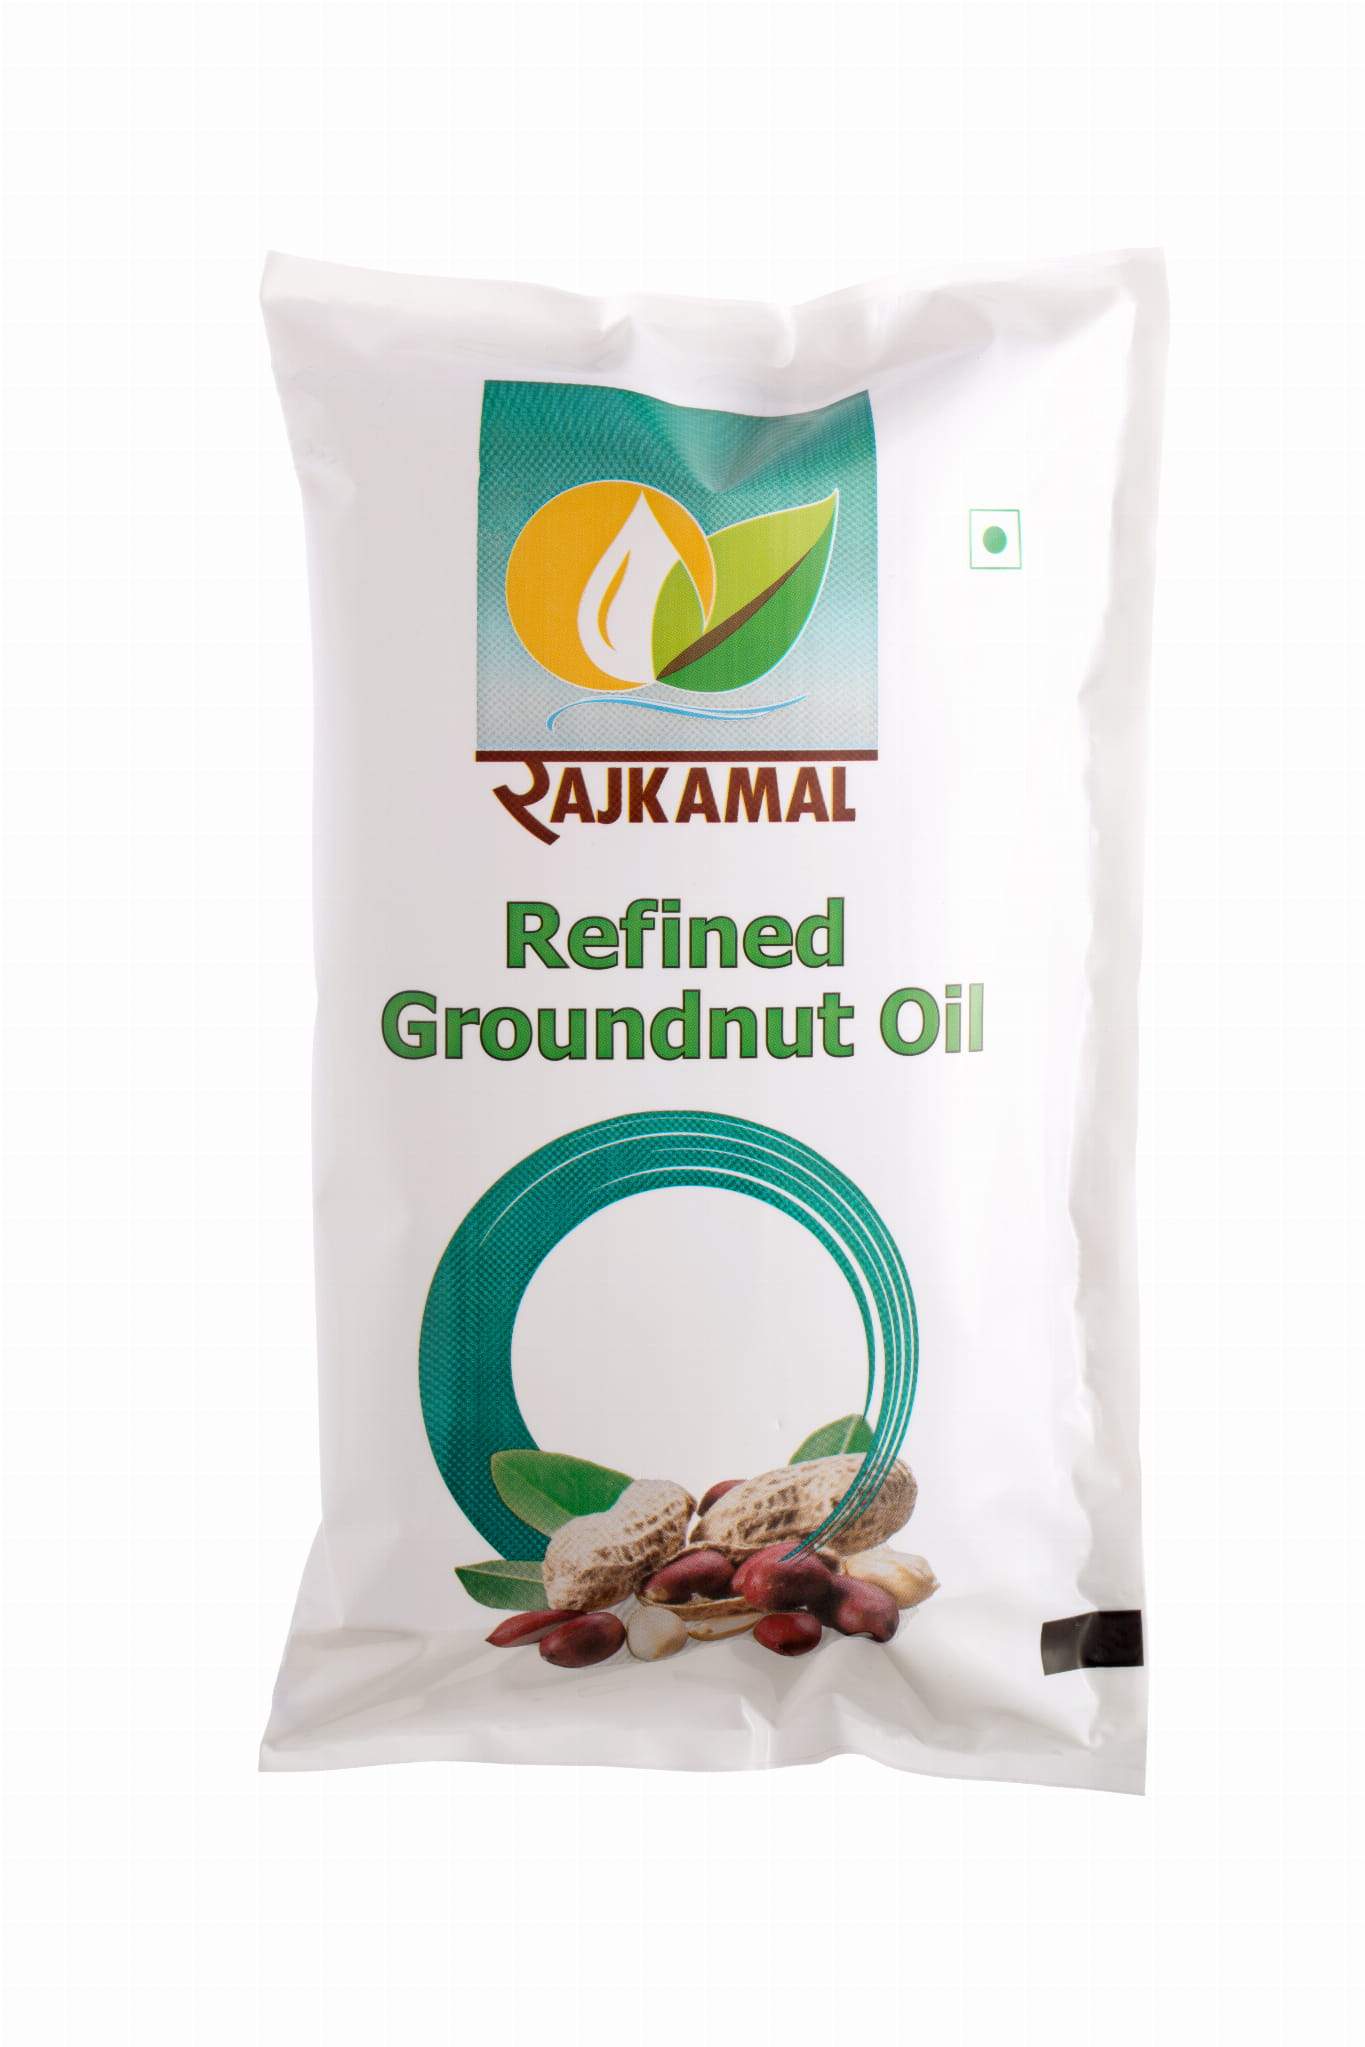 Refined Groundnut Oil - 1 Litre Pouch